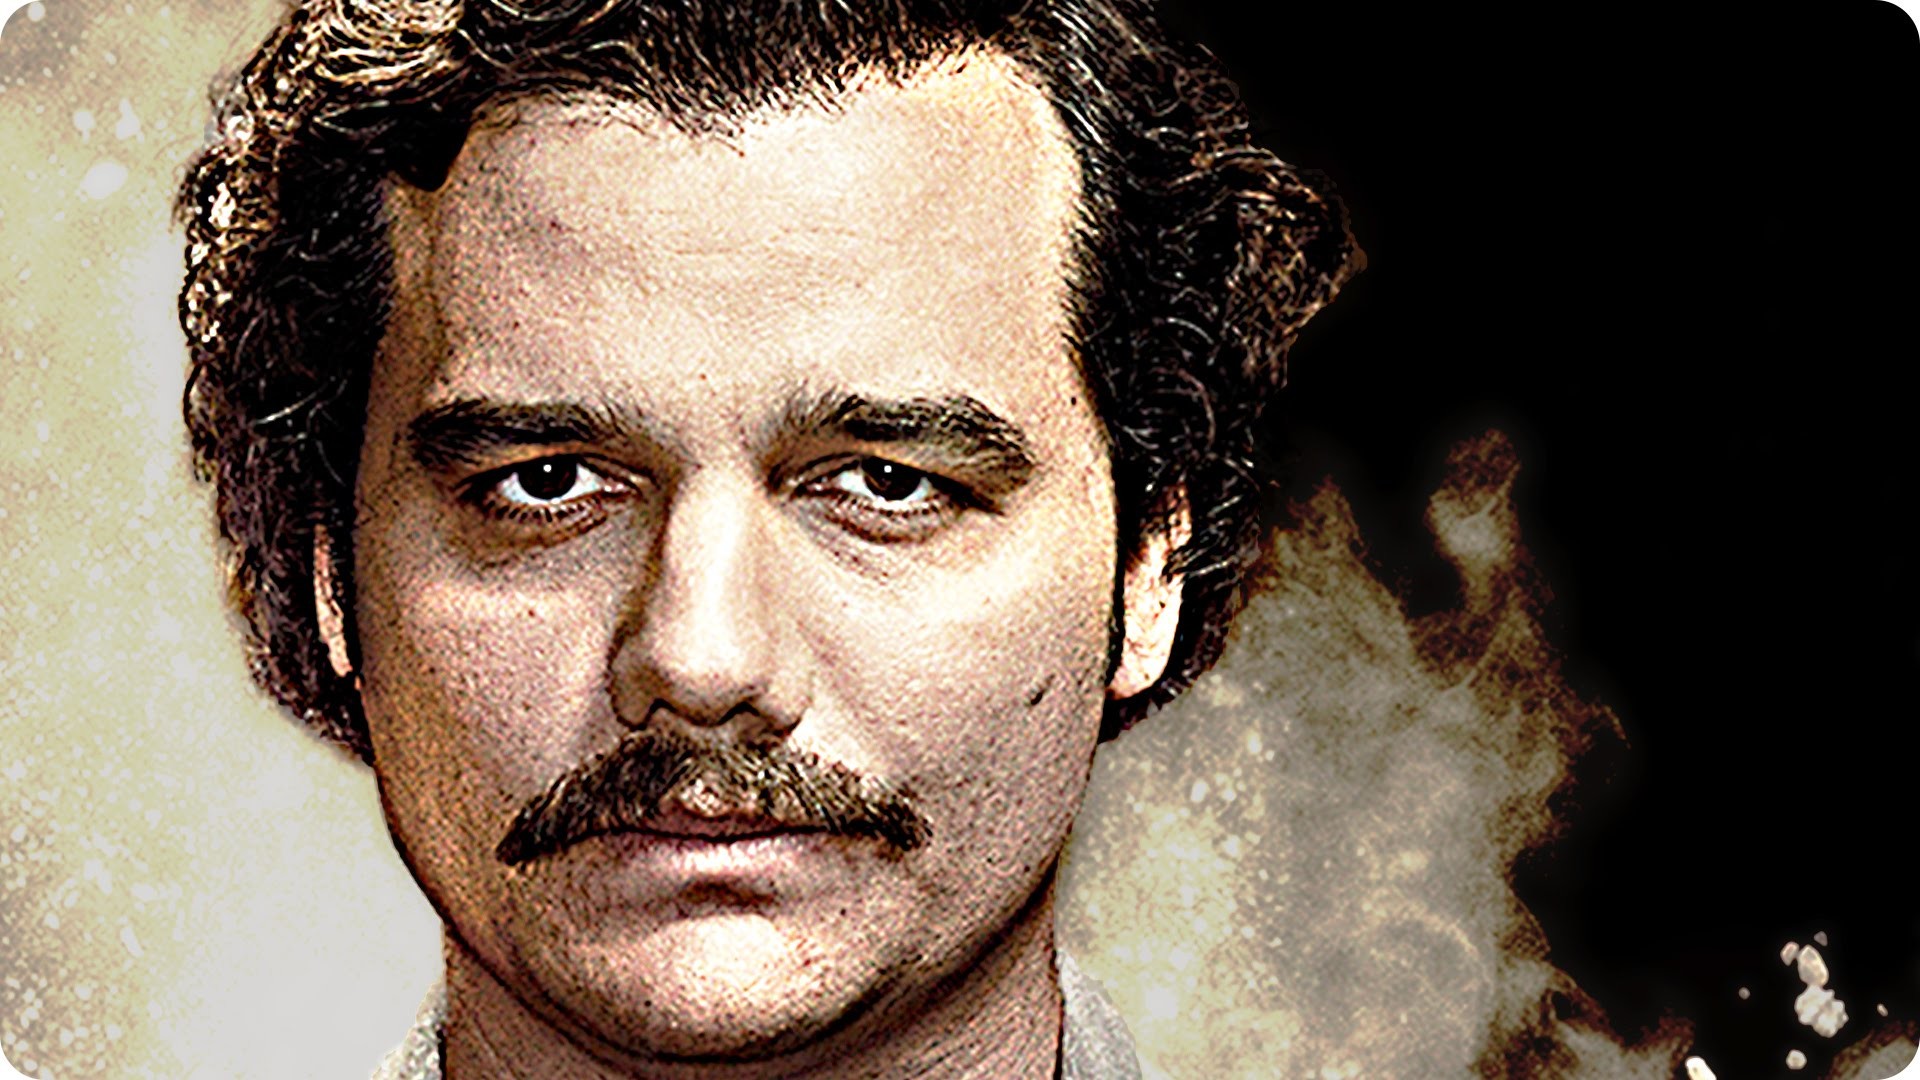 Pablo Escobar, The Drug Lord Phone Wallpaper - Mobile Abyss